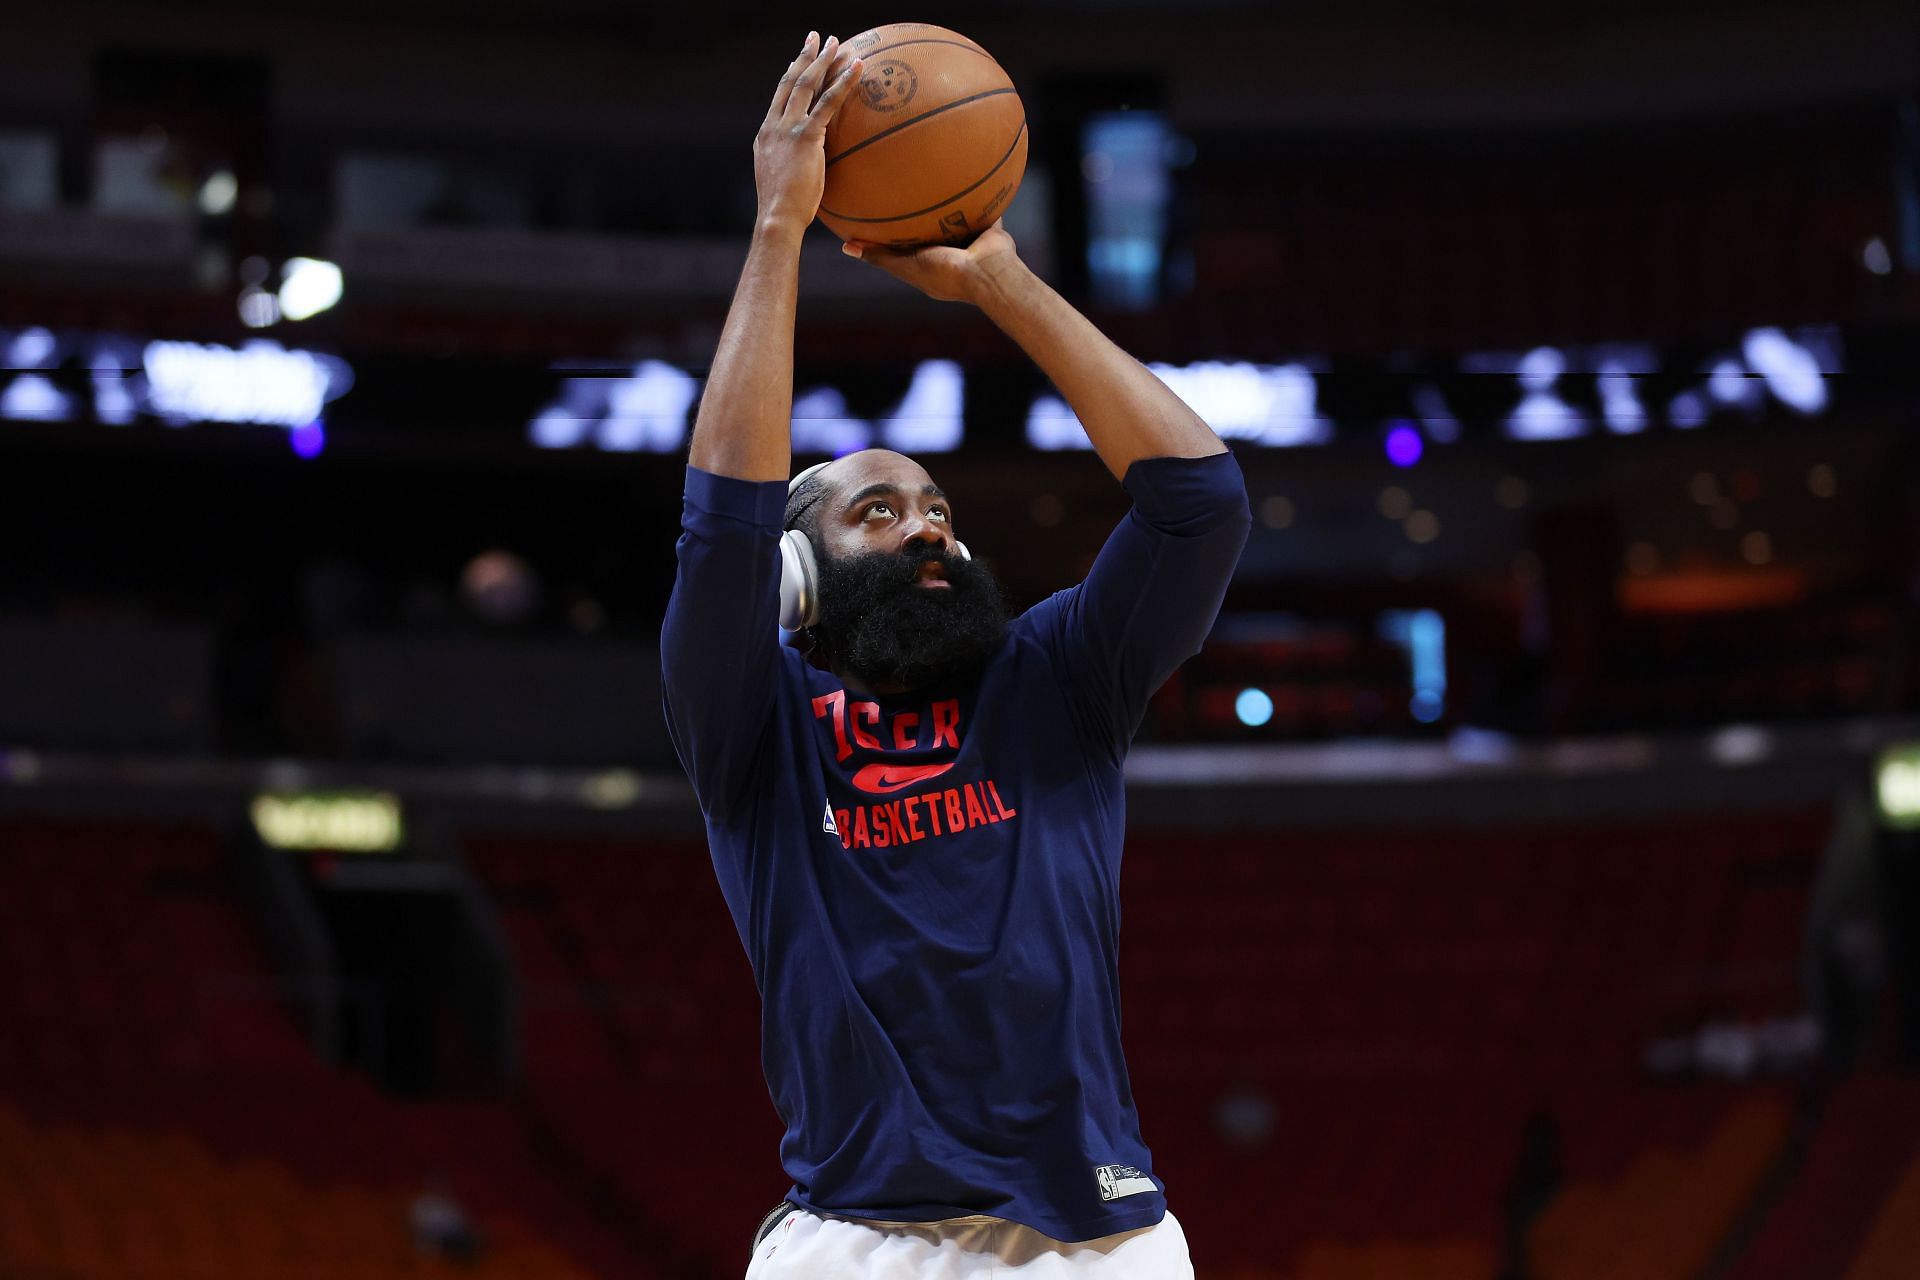 Star guard James Harden will play a key role for the Philadelphia 76ers in the second round of the NBA playoffs 